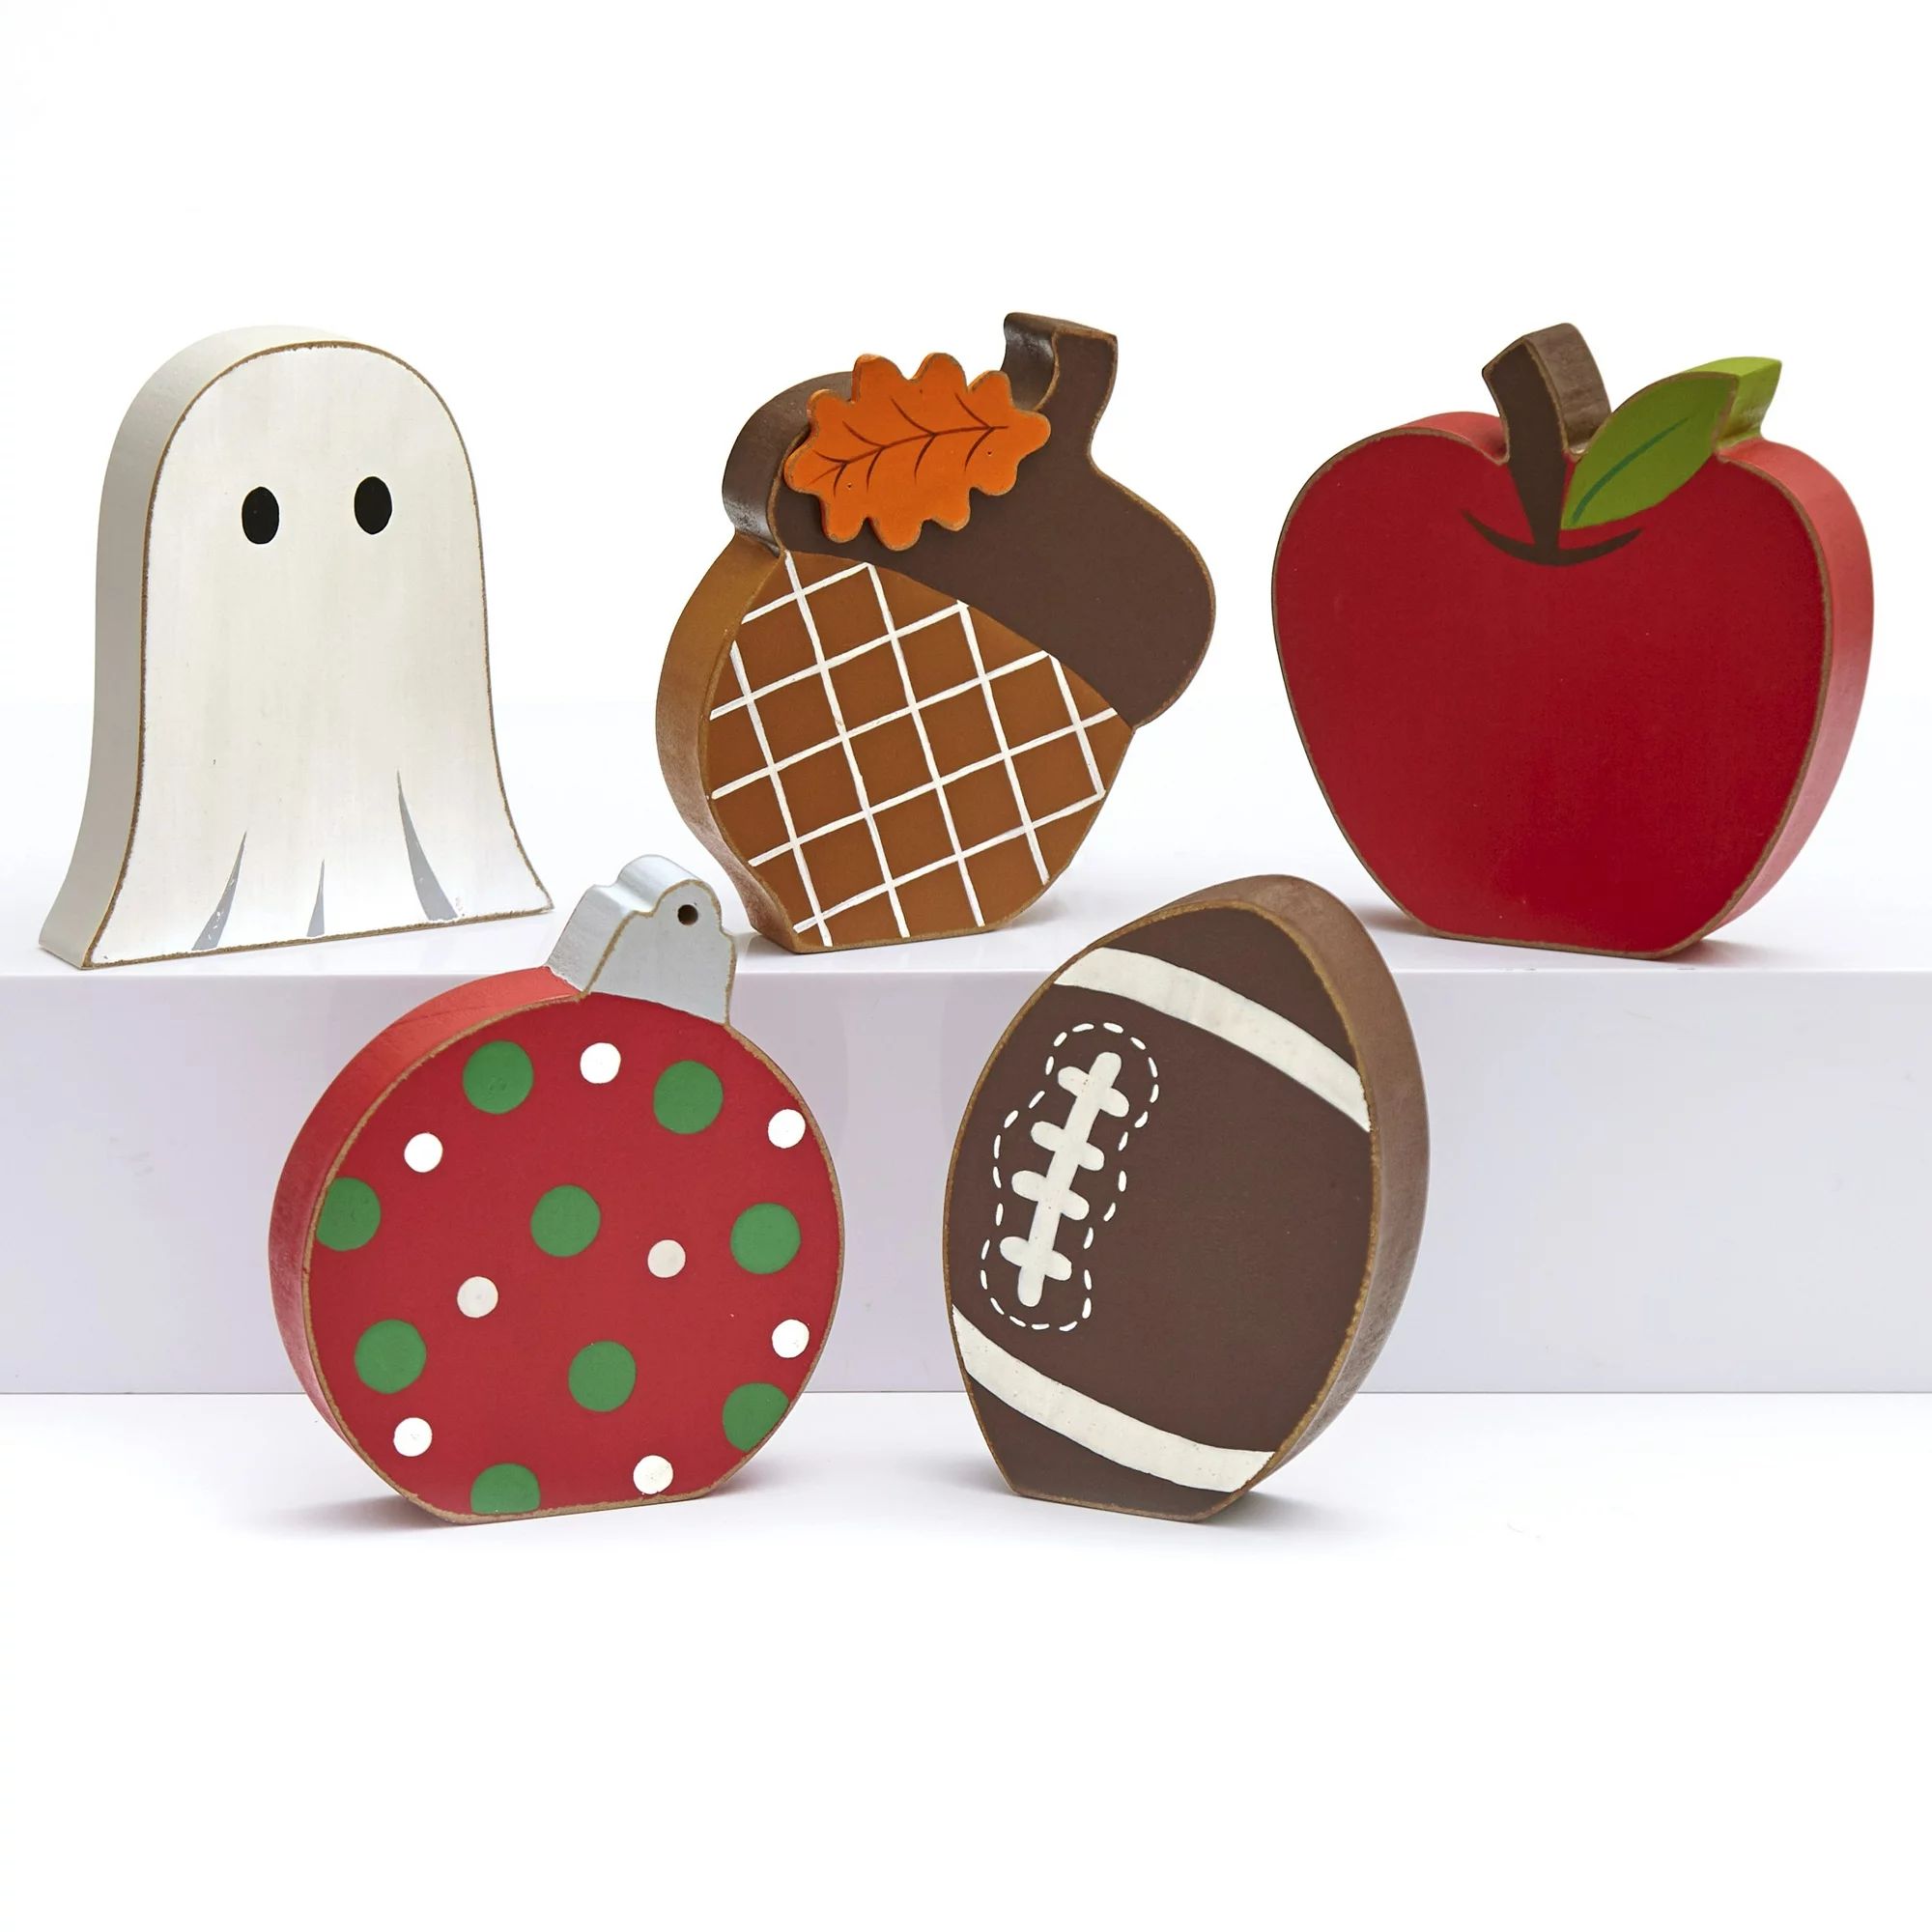 Winter and Fall Seasons Interchangeable Home Decoration Icons Set - 5 Pieces | Walmart (US)